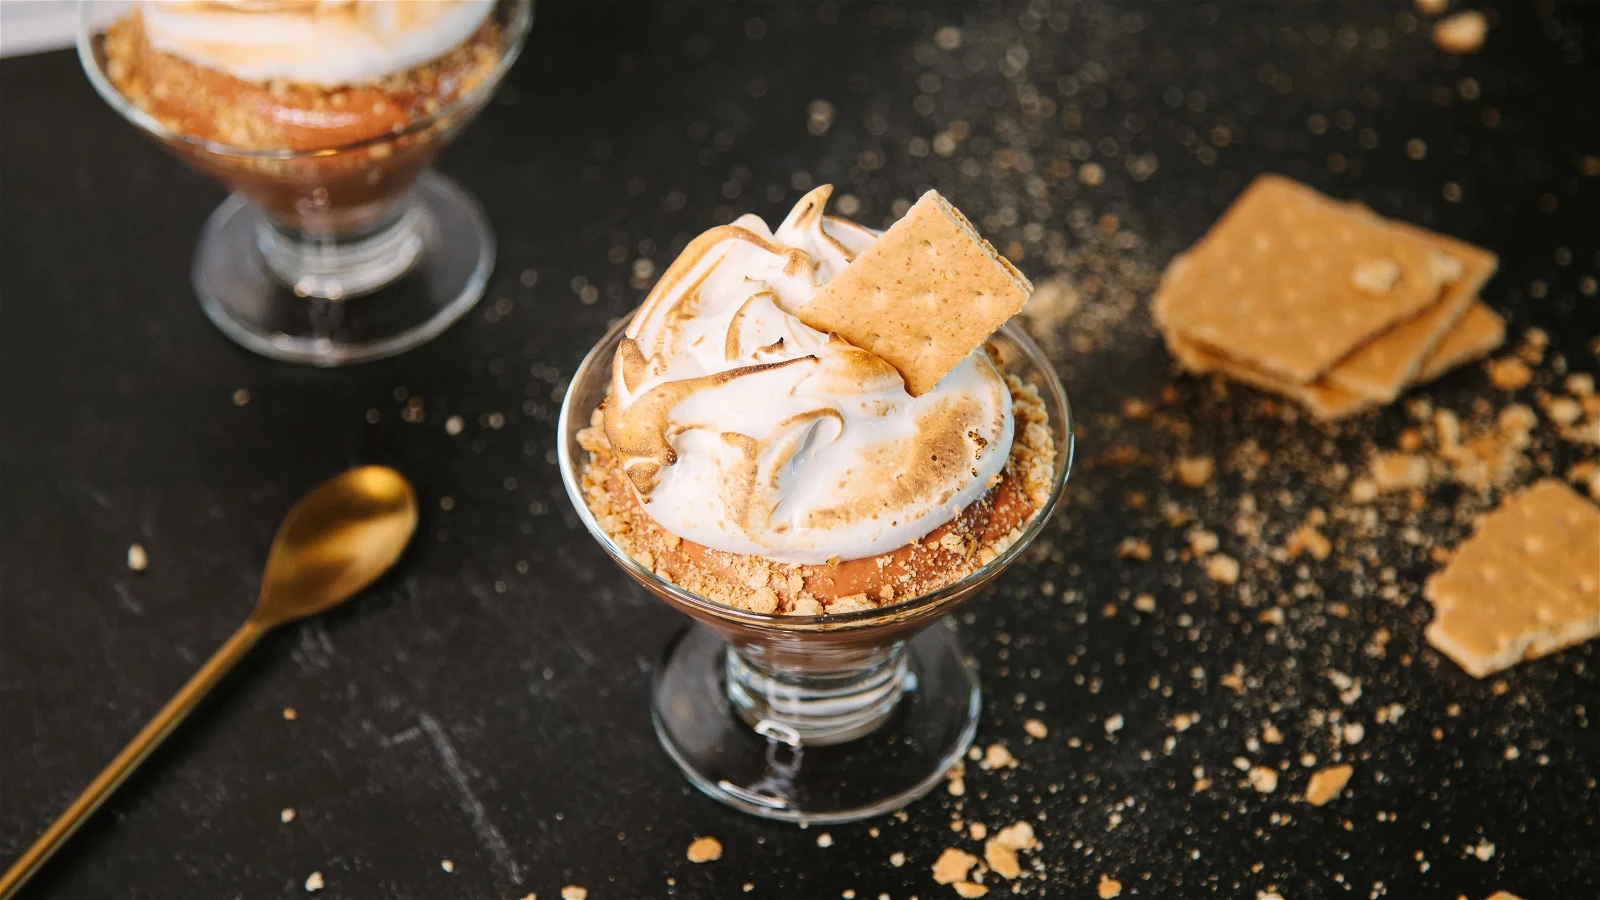 Image of S'mores Chocolate Mousse